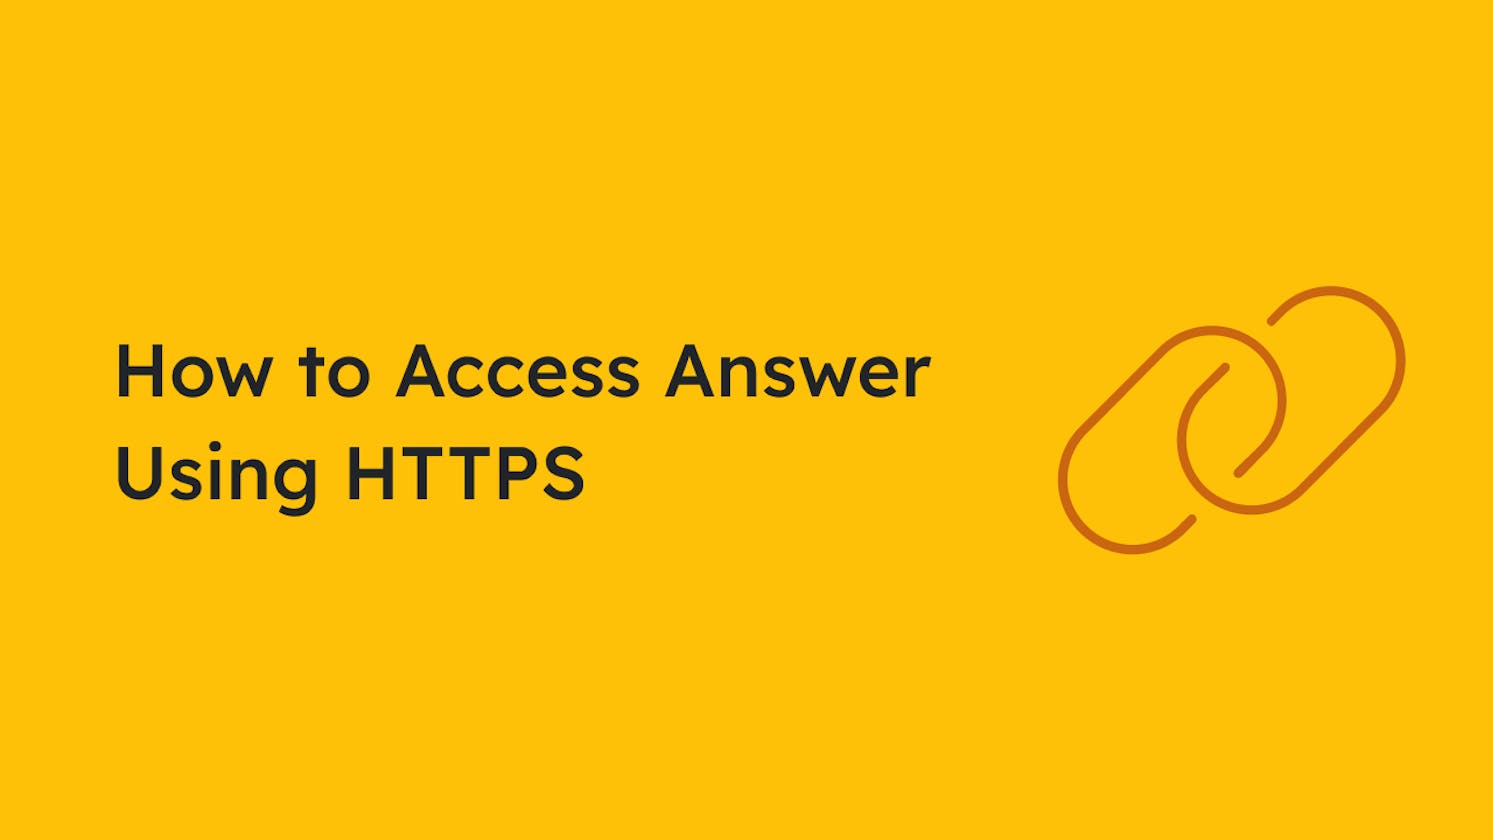 How to Access Answer Using HTTPS